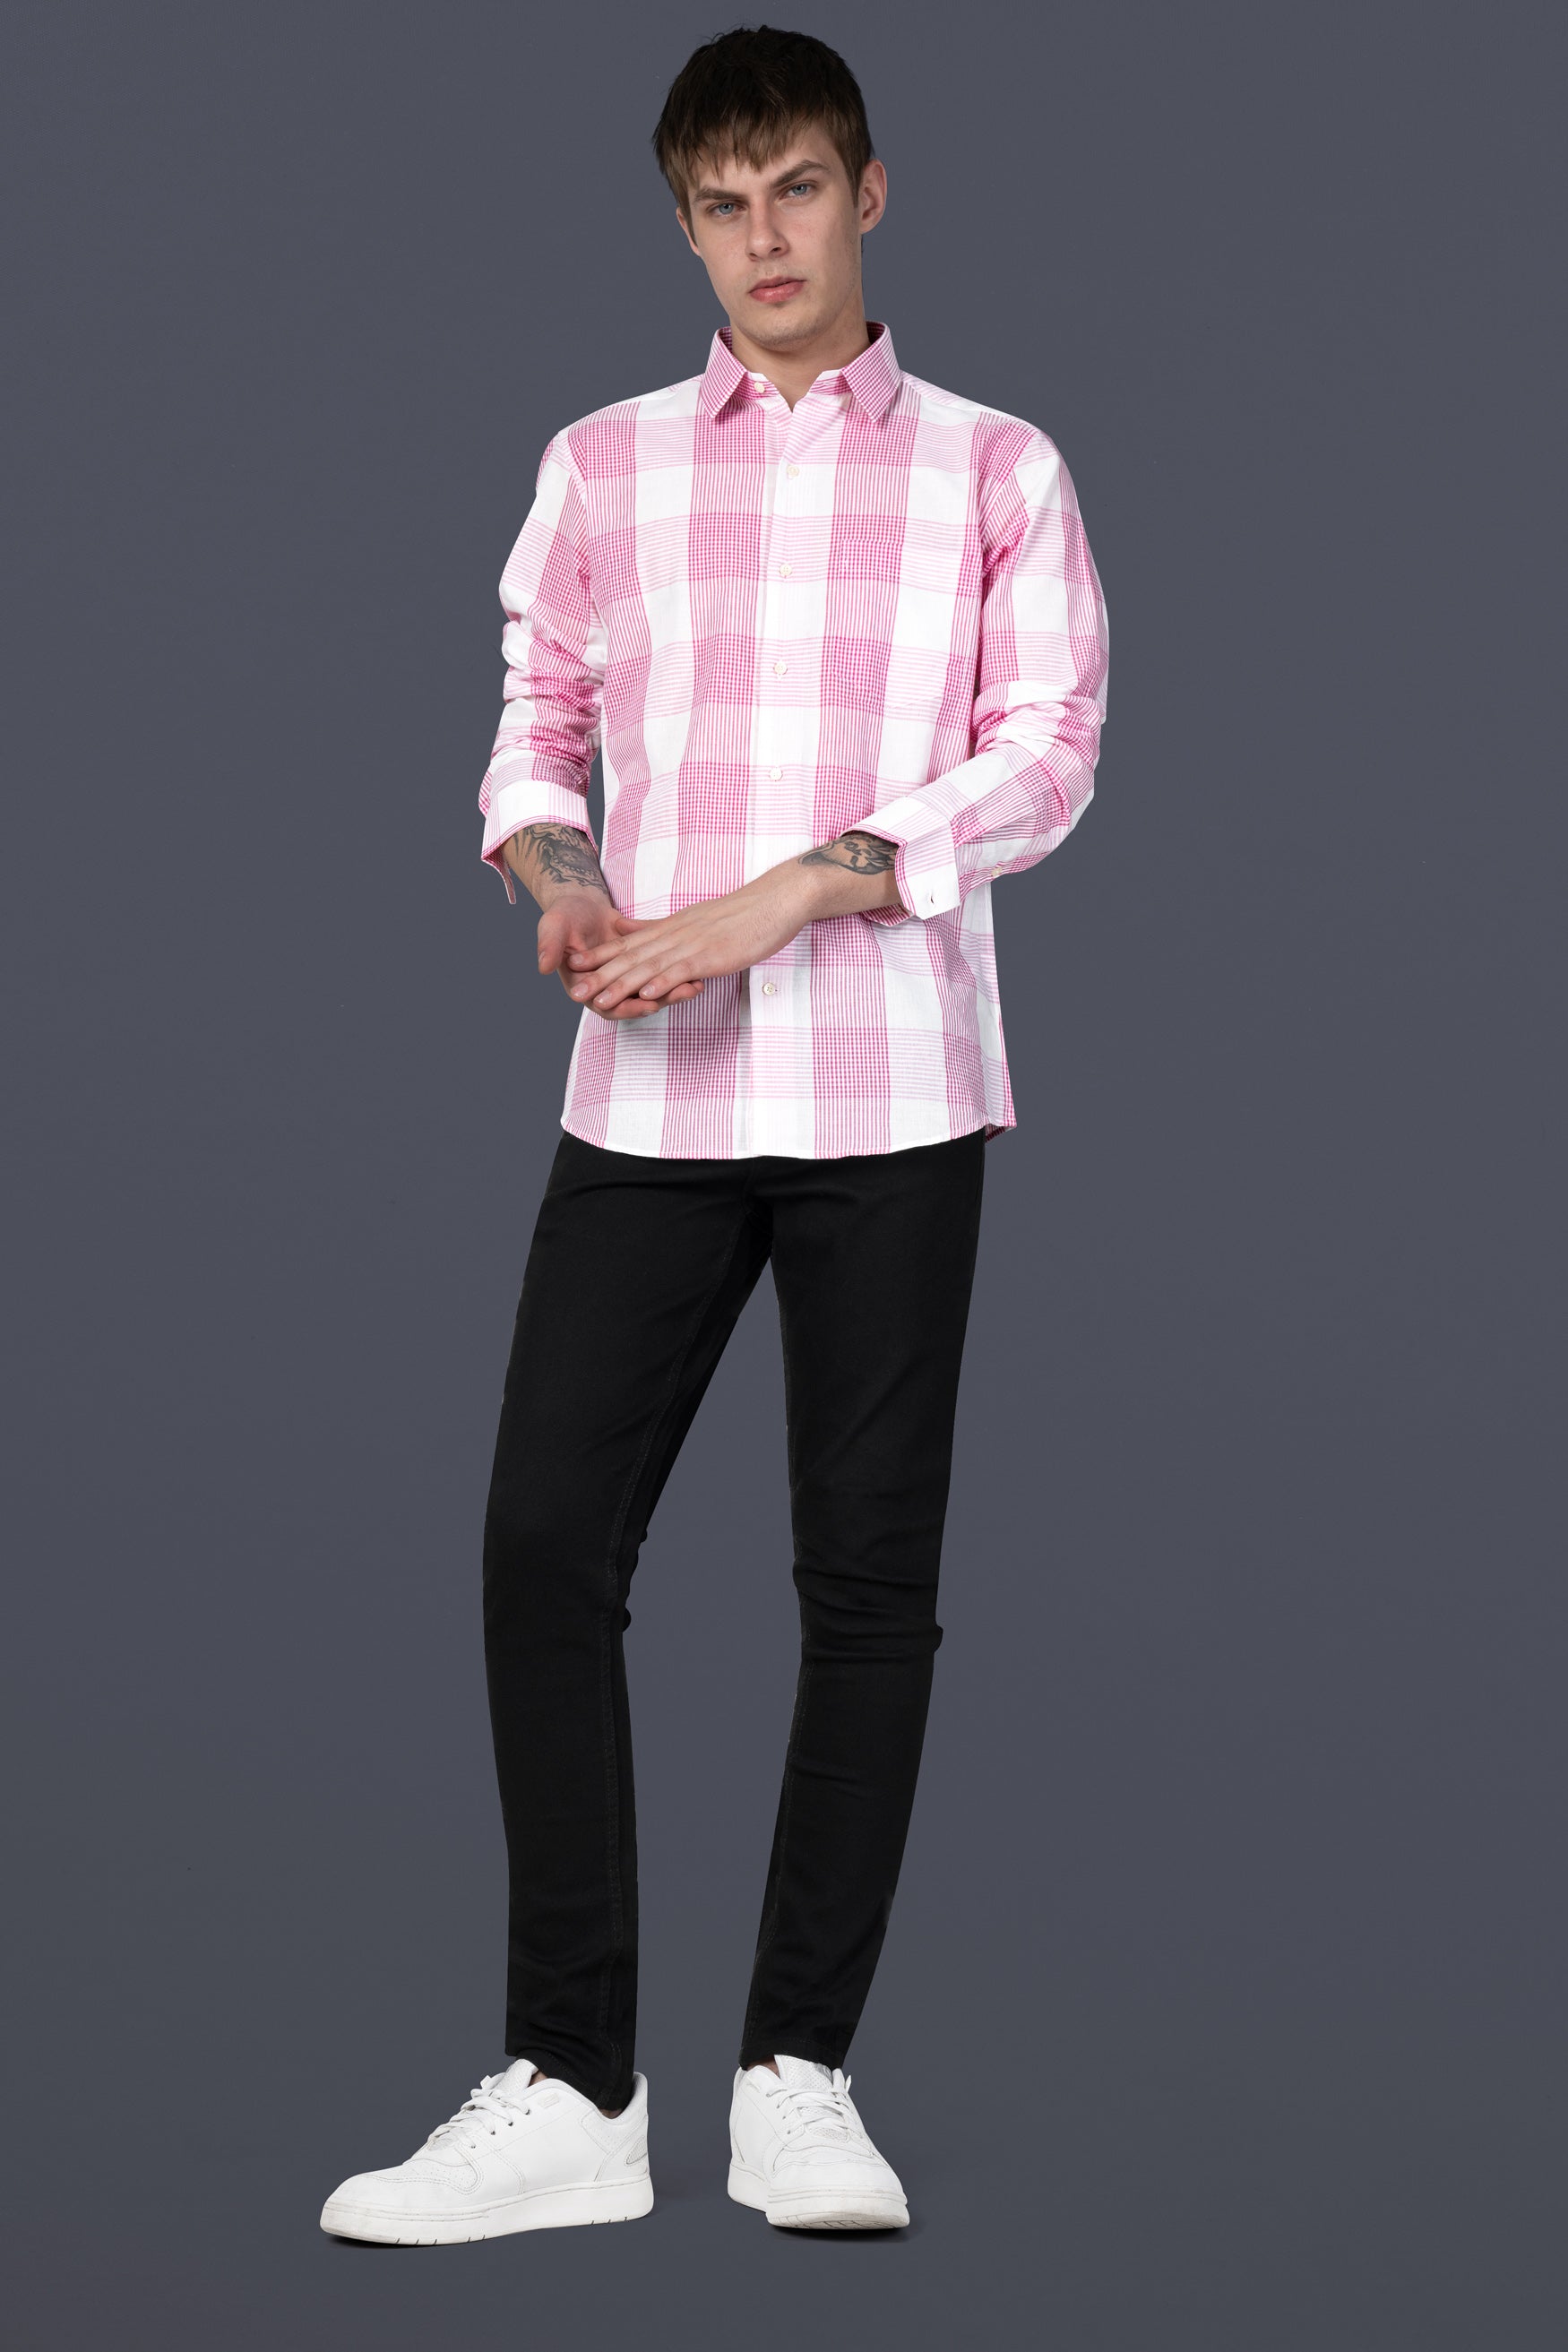 Bright White and Cadillac Pink Gingham Checkered Premium Cotton Shirt 12194-38, 12194-H-38, 12194-39, 12194-H-39, 12194-40, 12194-H-40, 12194-42, 12194-H-42, 12194-44, 12194-H-44, 12194-46, 12194-H-46, 12194-48, 12194-H-48, 12194-50, 12194-H-50, 12194-52, 12194-H-52